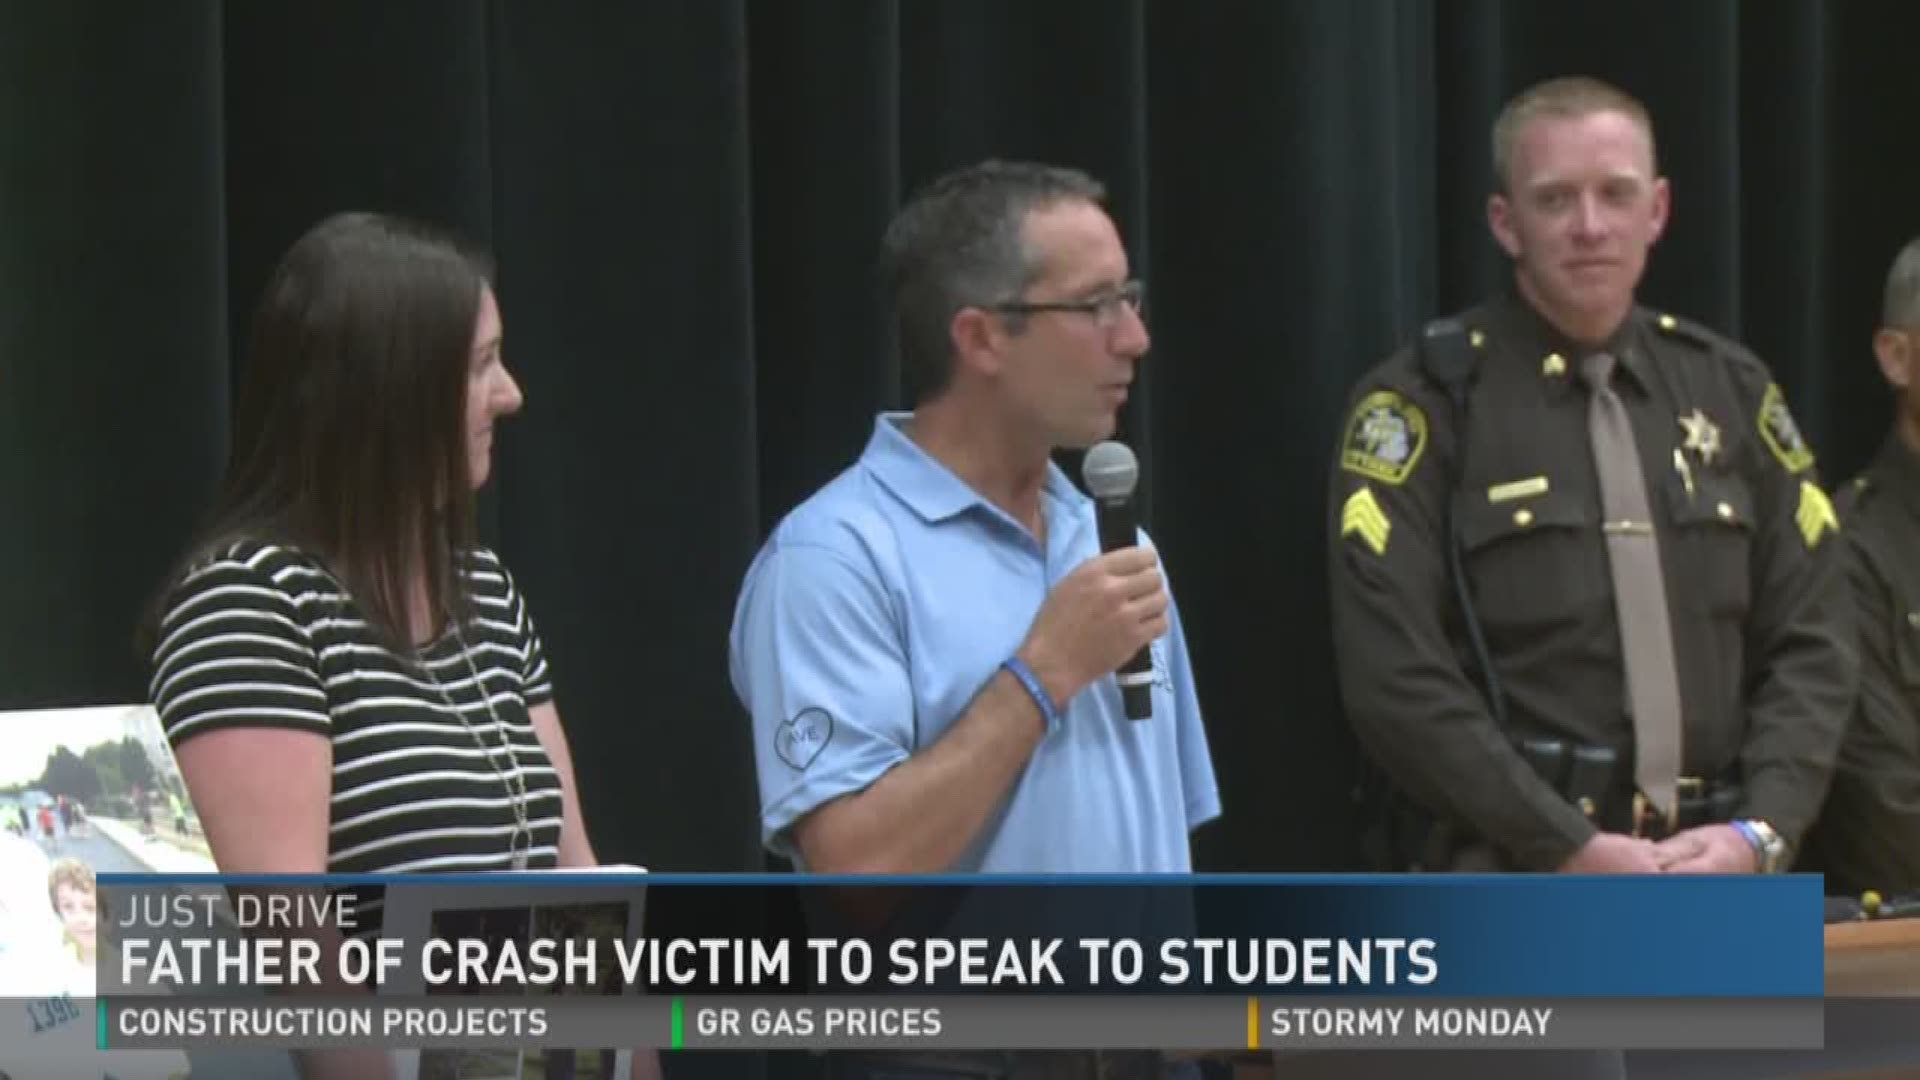 Father of crash victim speaks to students